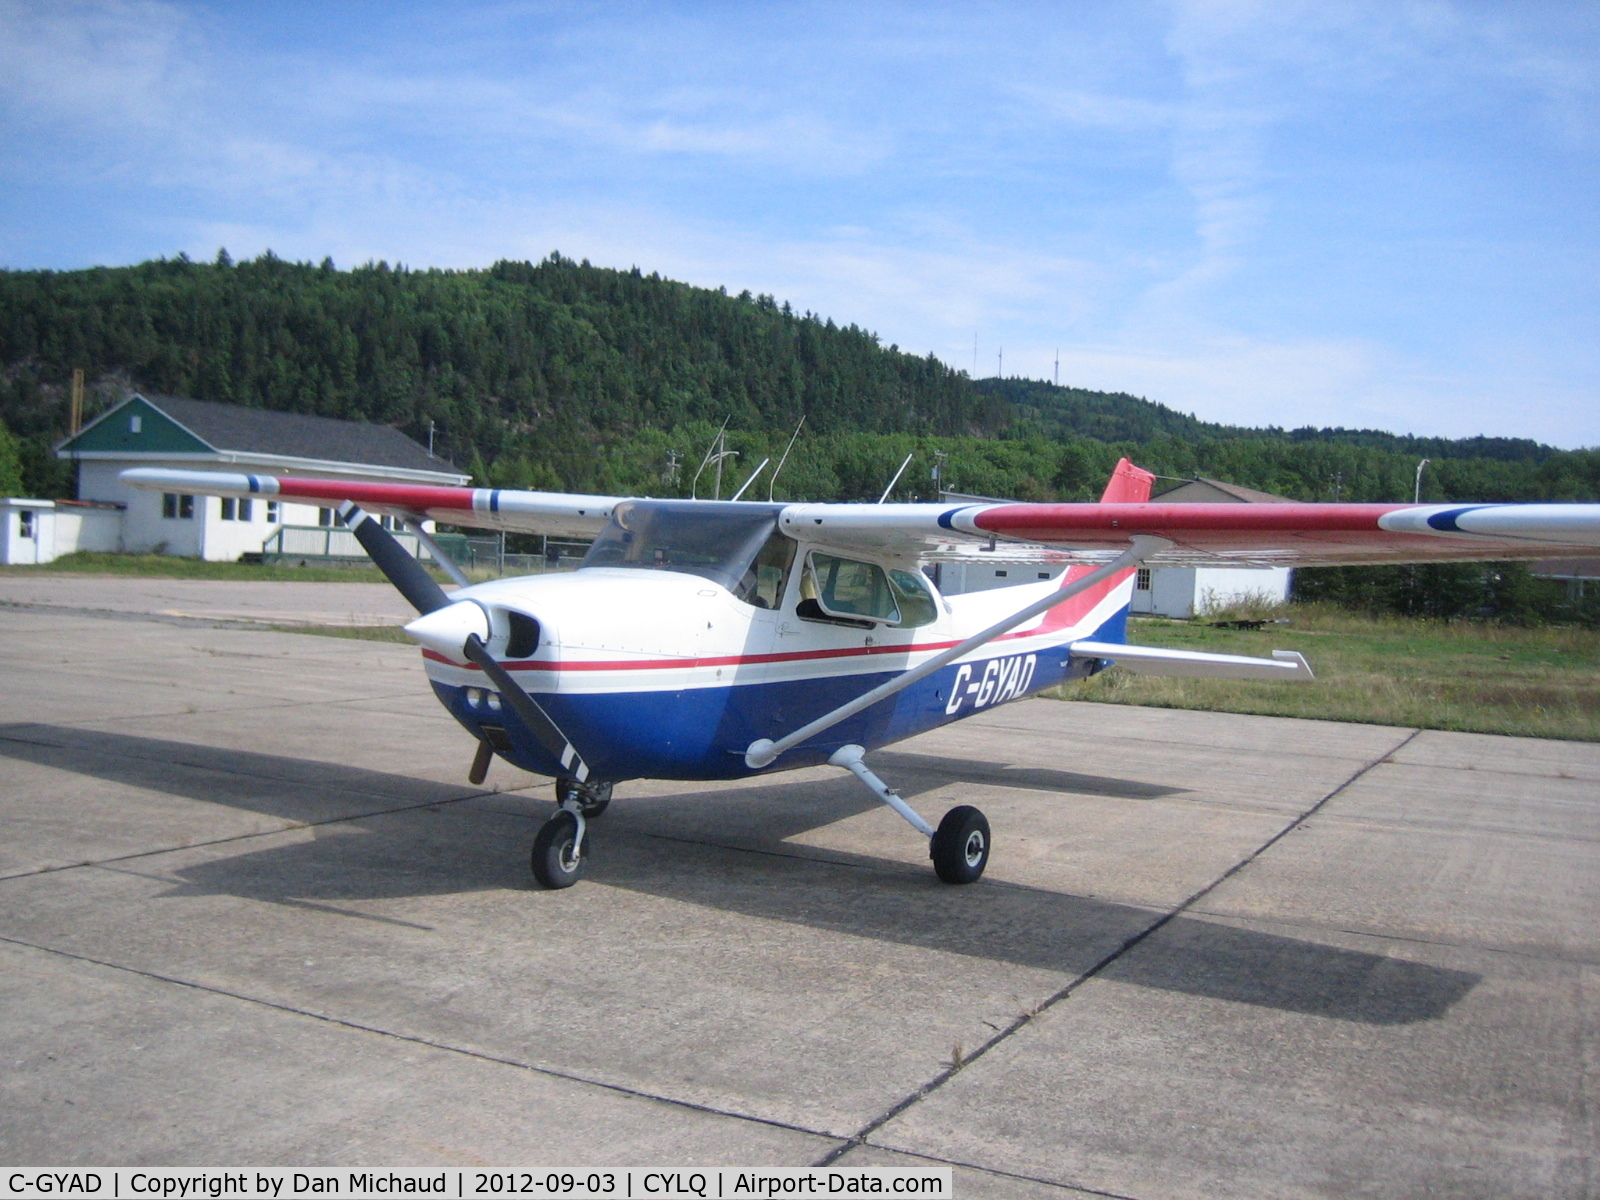 C-GYAD, 1976 Cessna 172M C/N 17266568, C-GYAD at La Tuque airport on a flight from CYQB